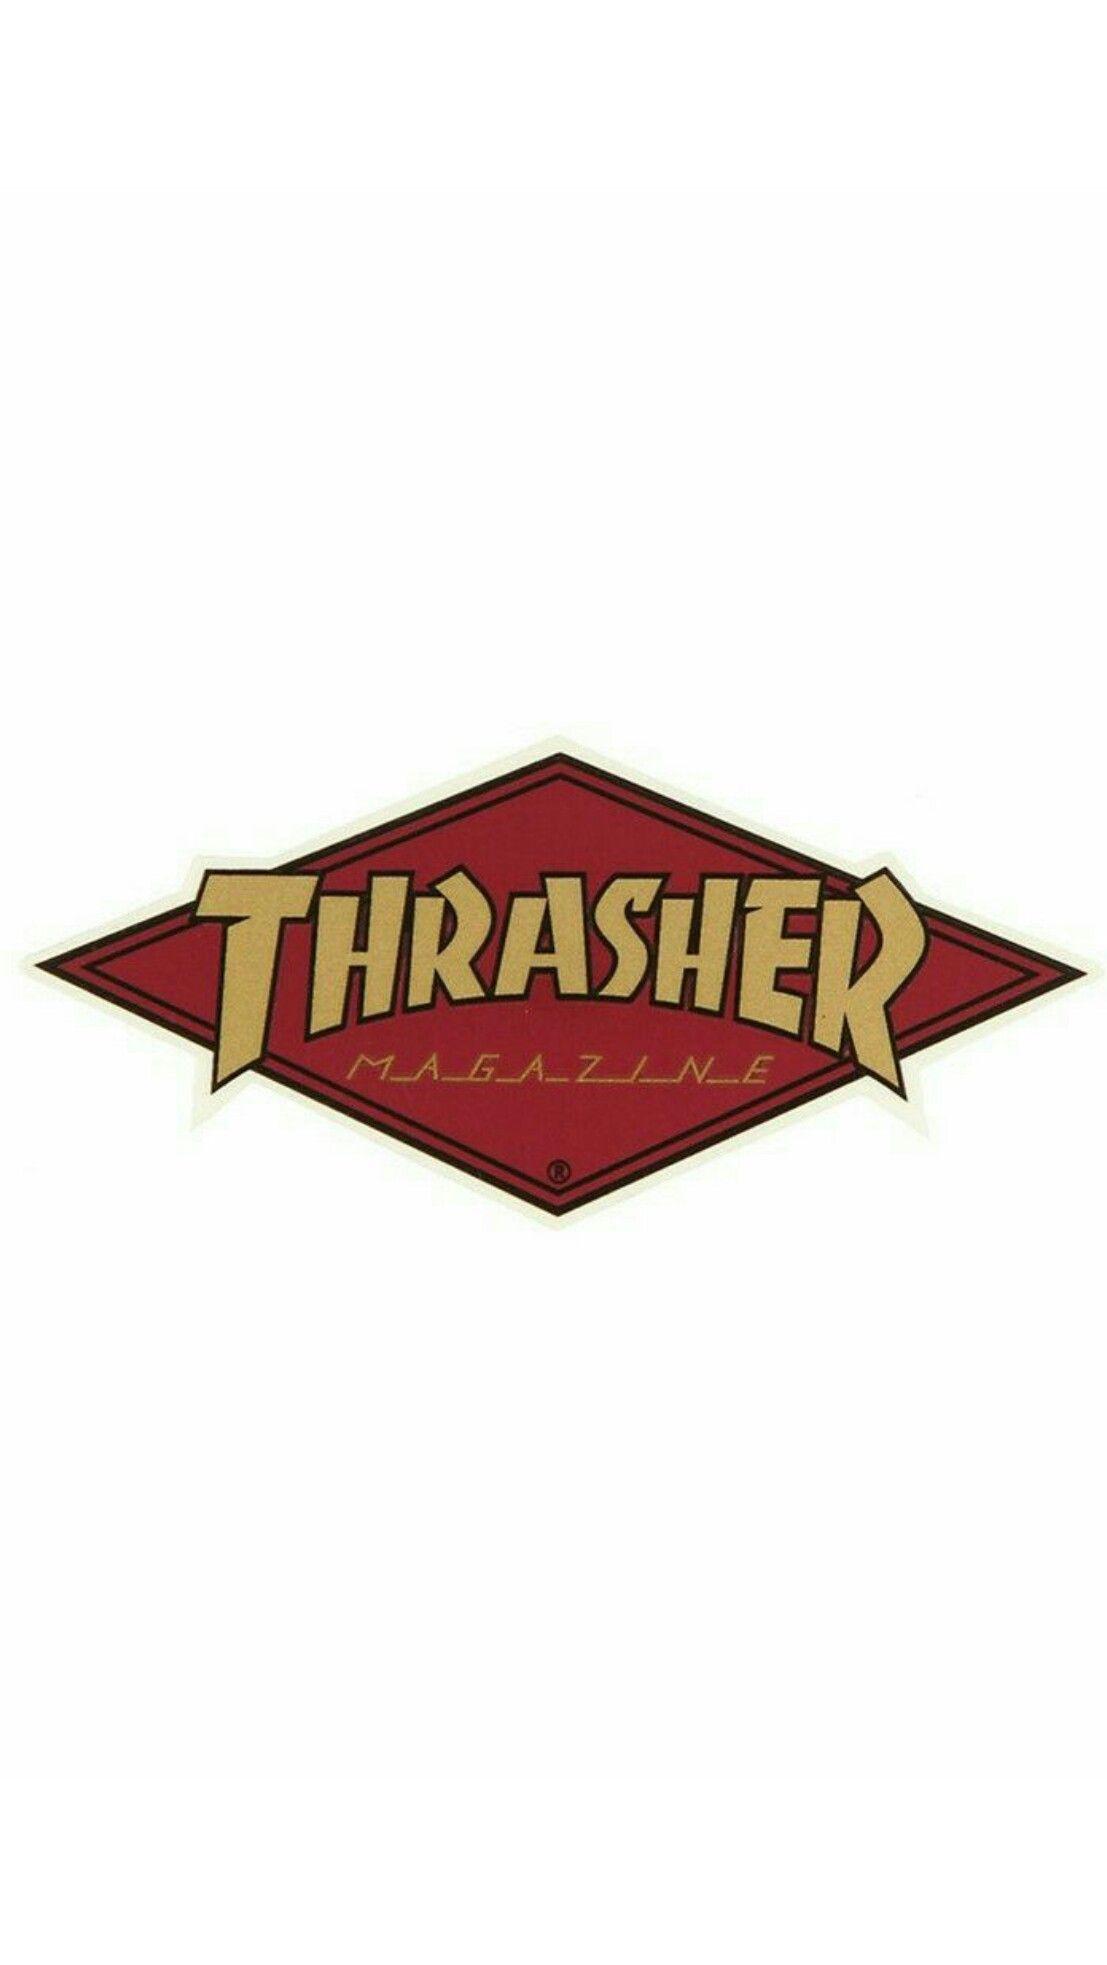 thrasher #usa #black #wallpaper #android #iphone. Wallpaper